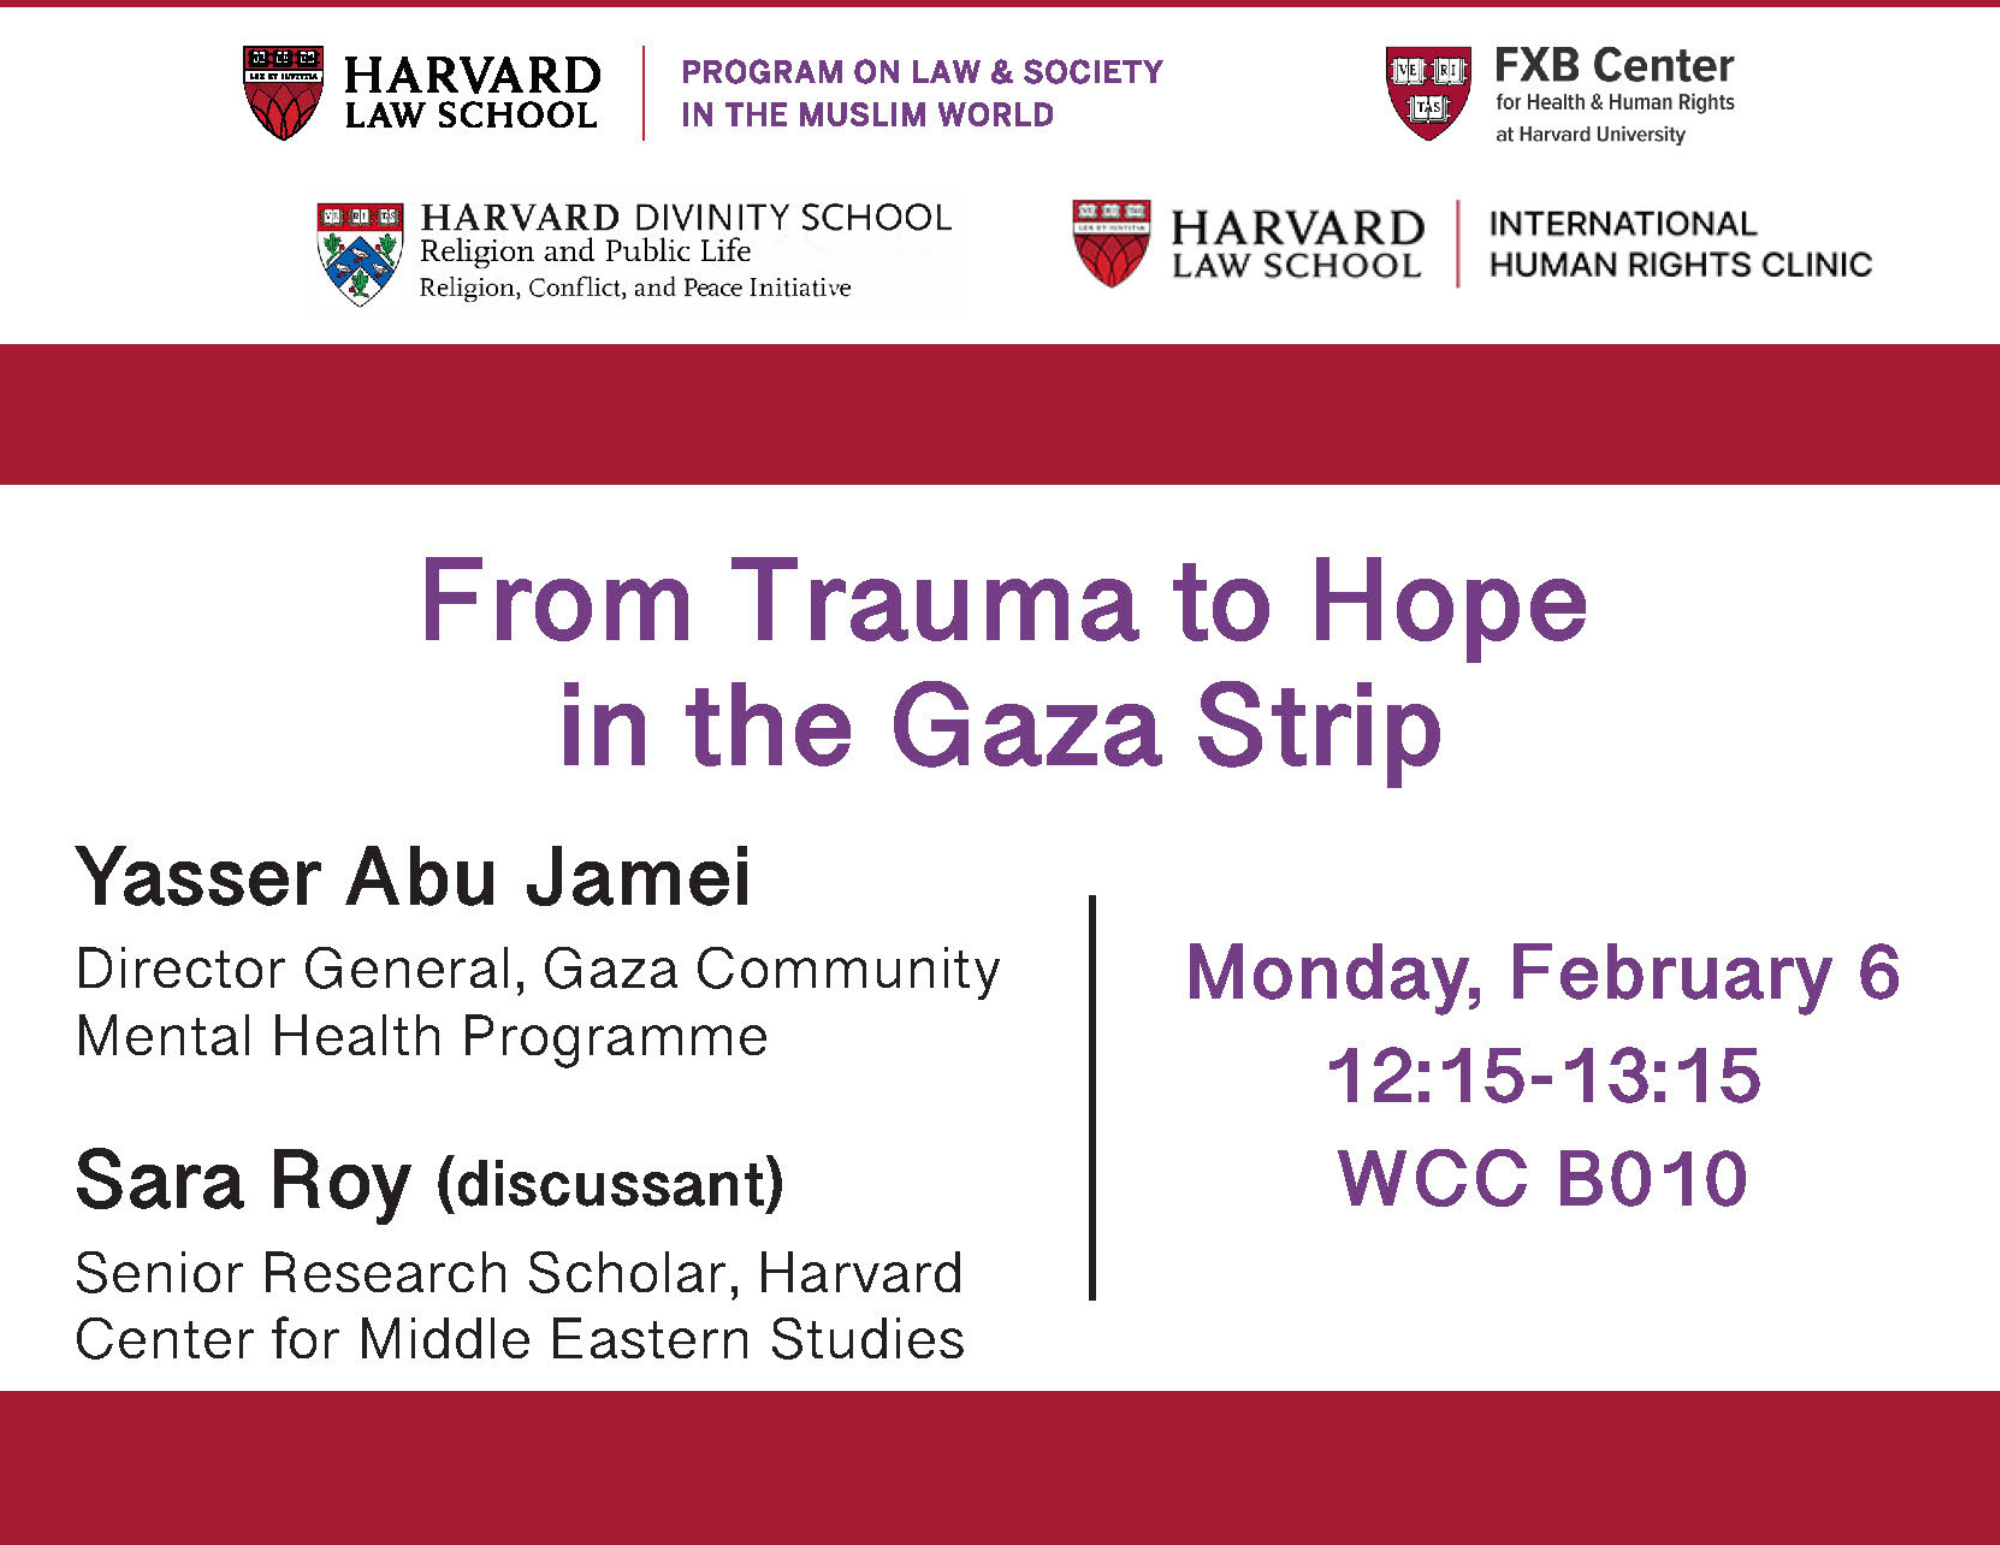 From Trauma to Hope in the Gaza Strip